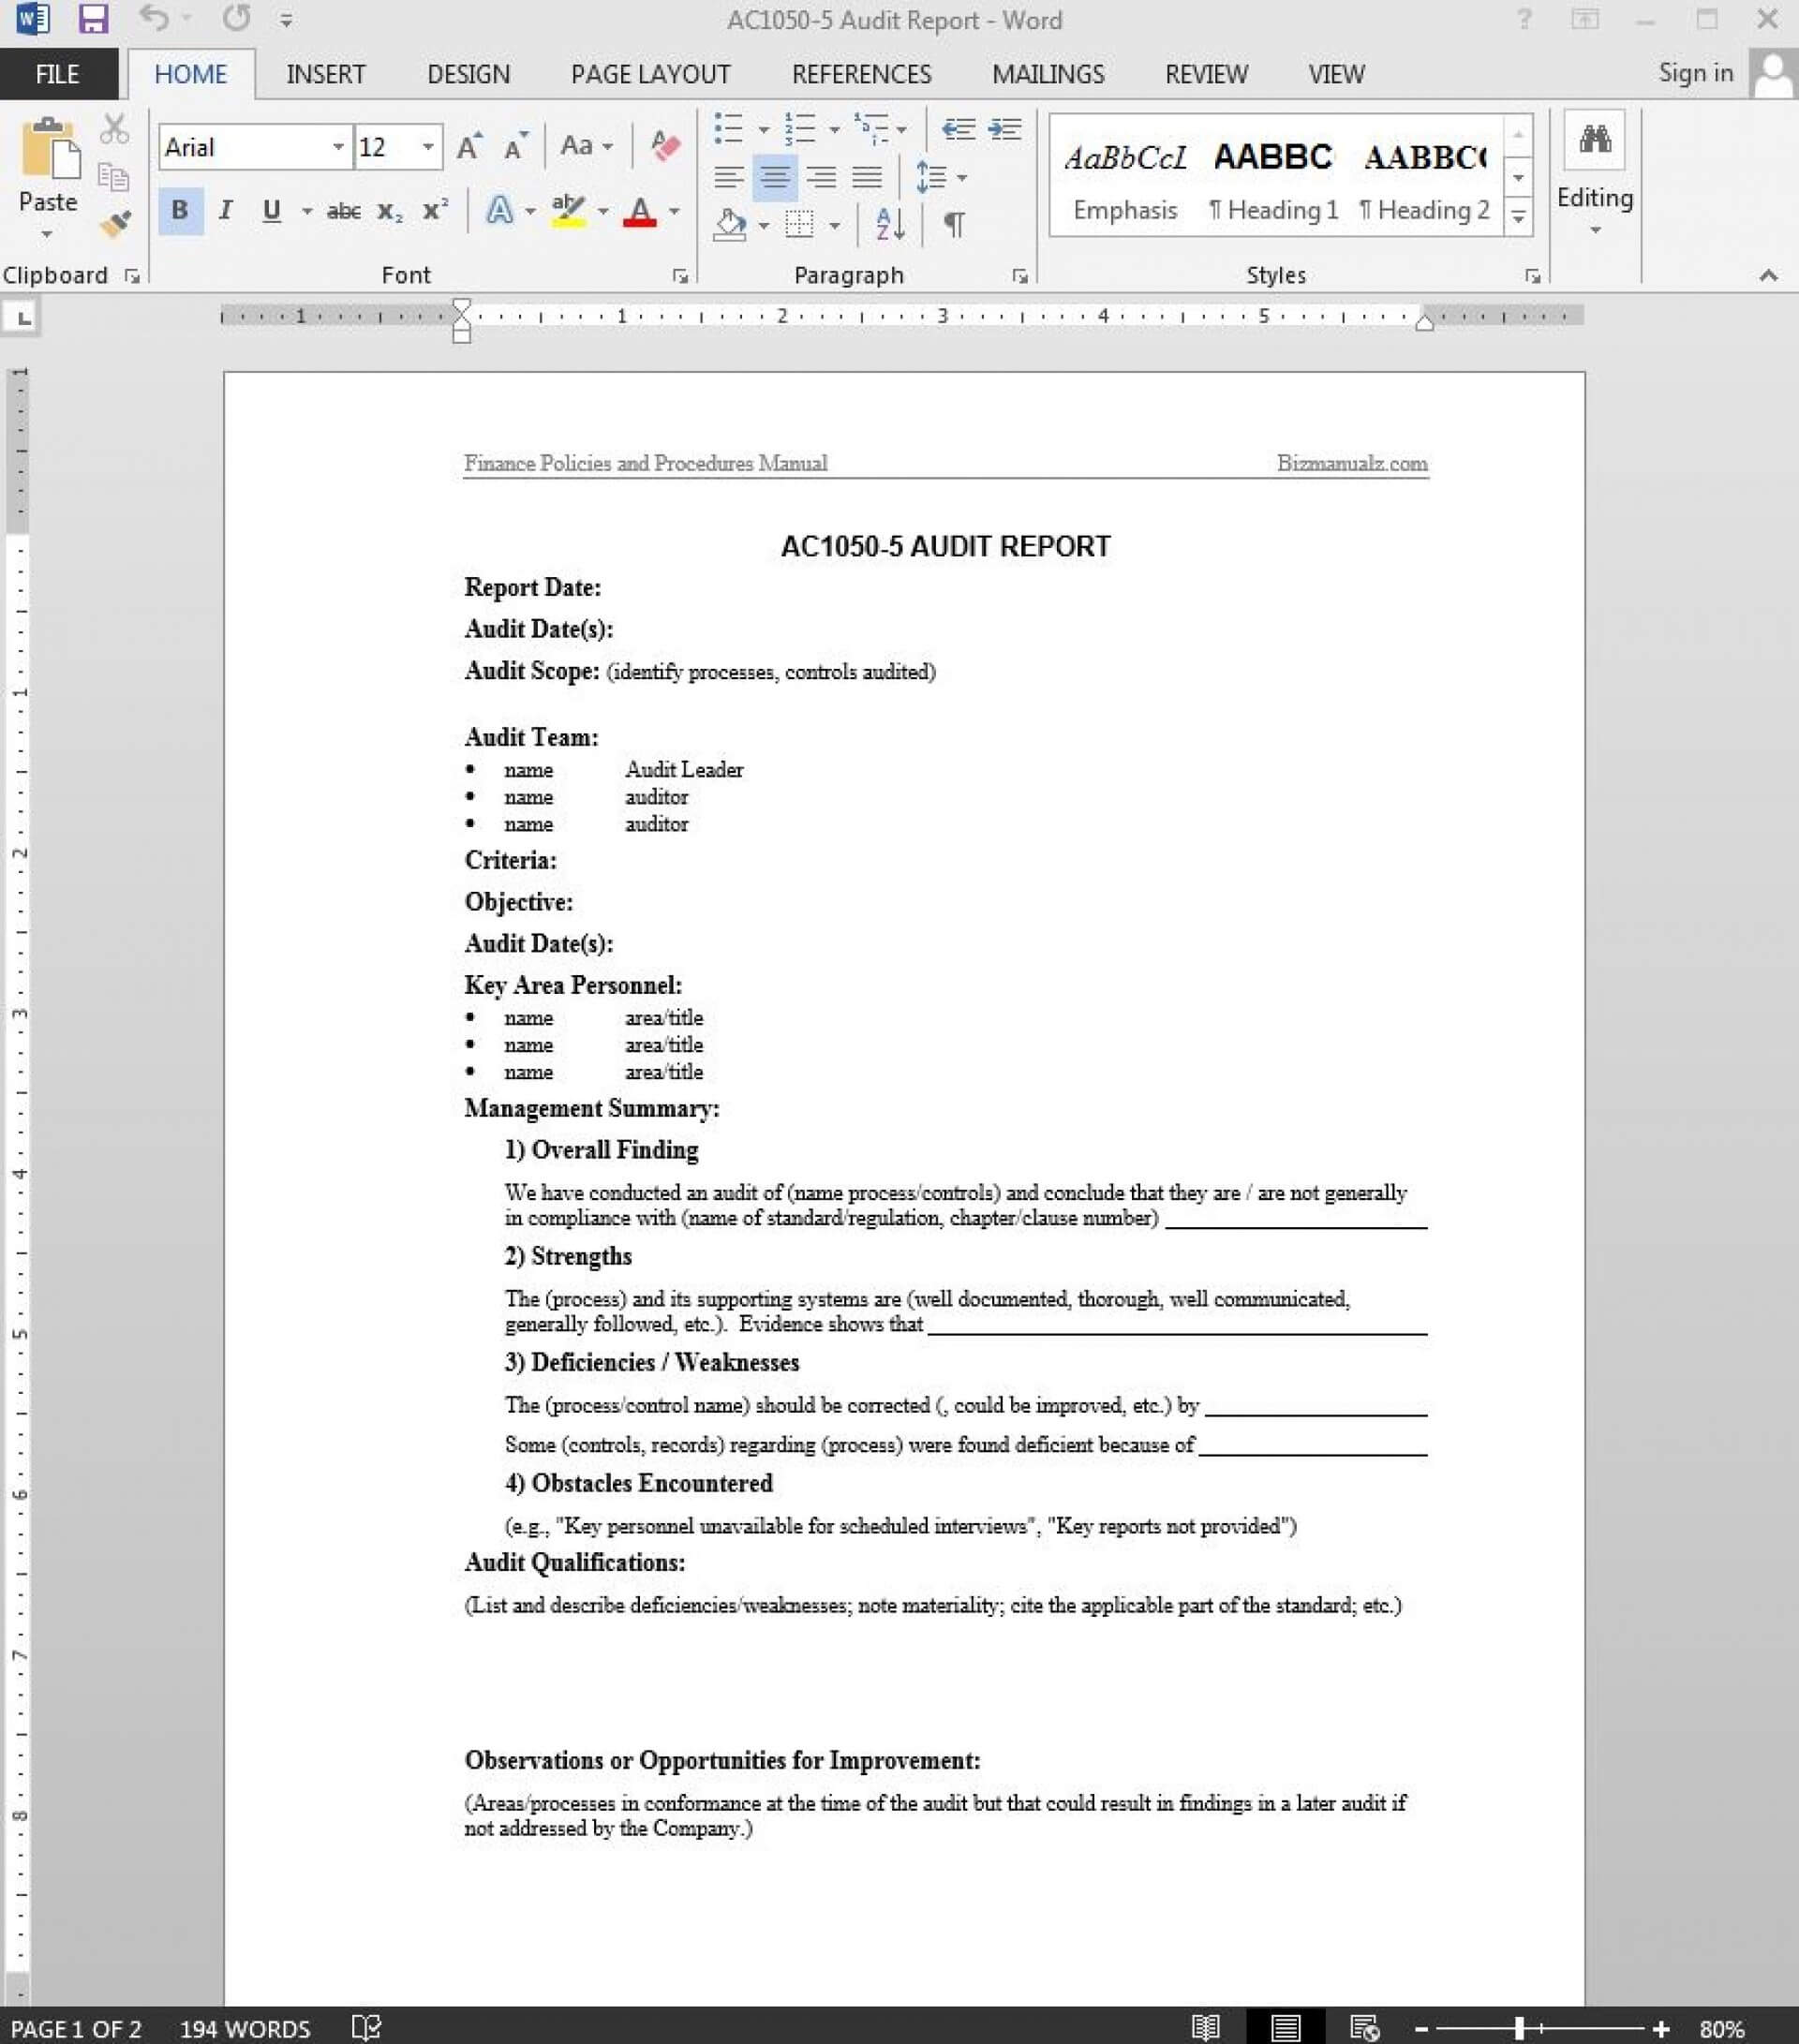 028 Internal Audit Report Template Stupendous Ideas Iia Word With Regard To Template For Audit Report